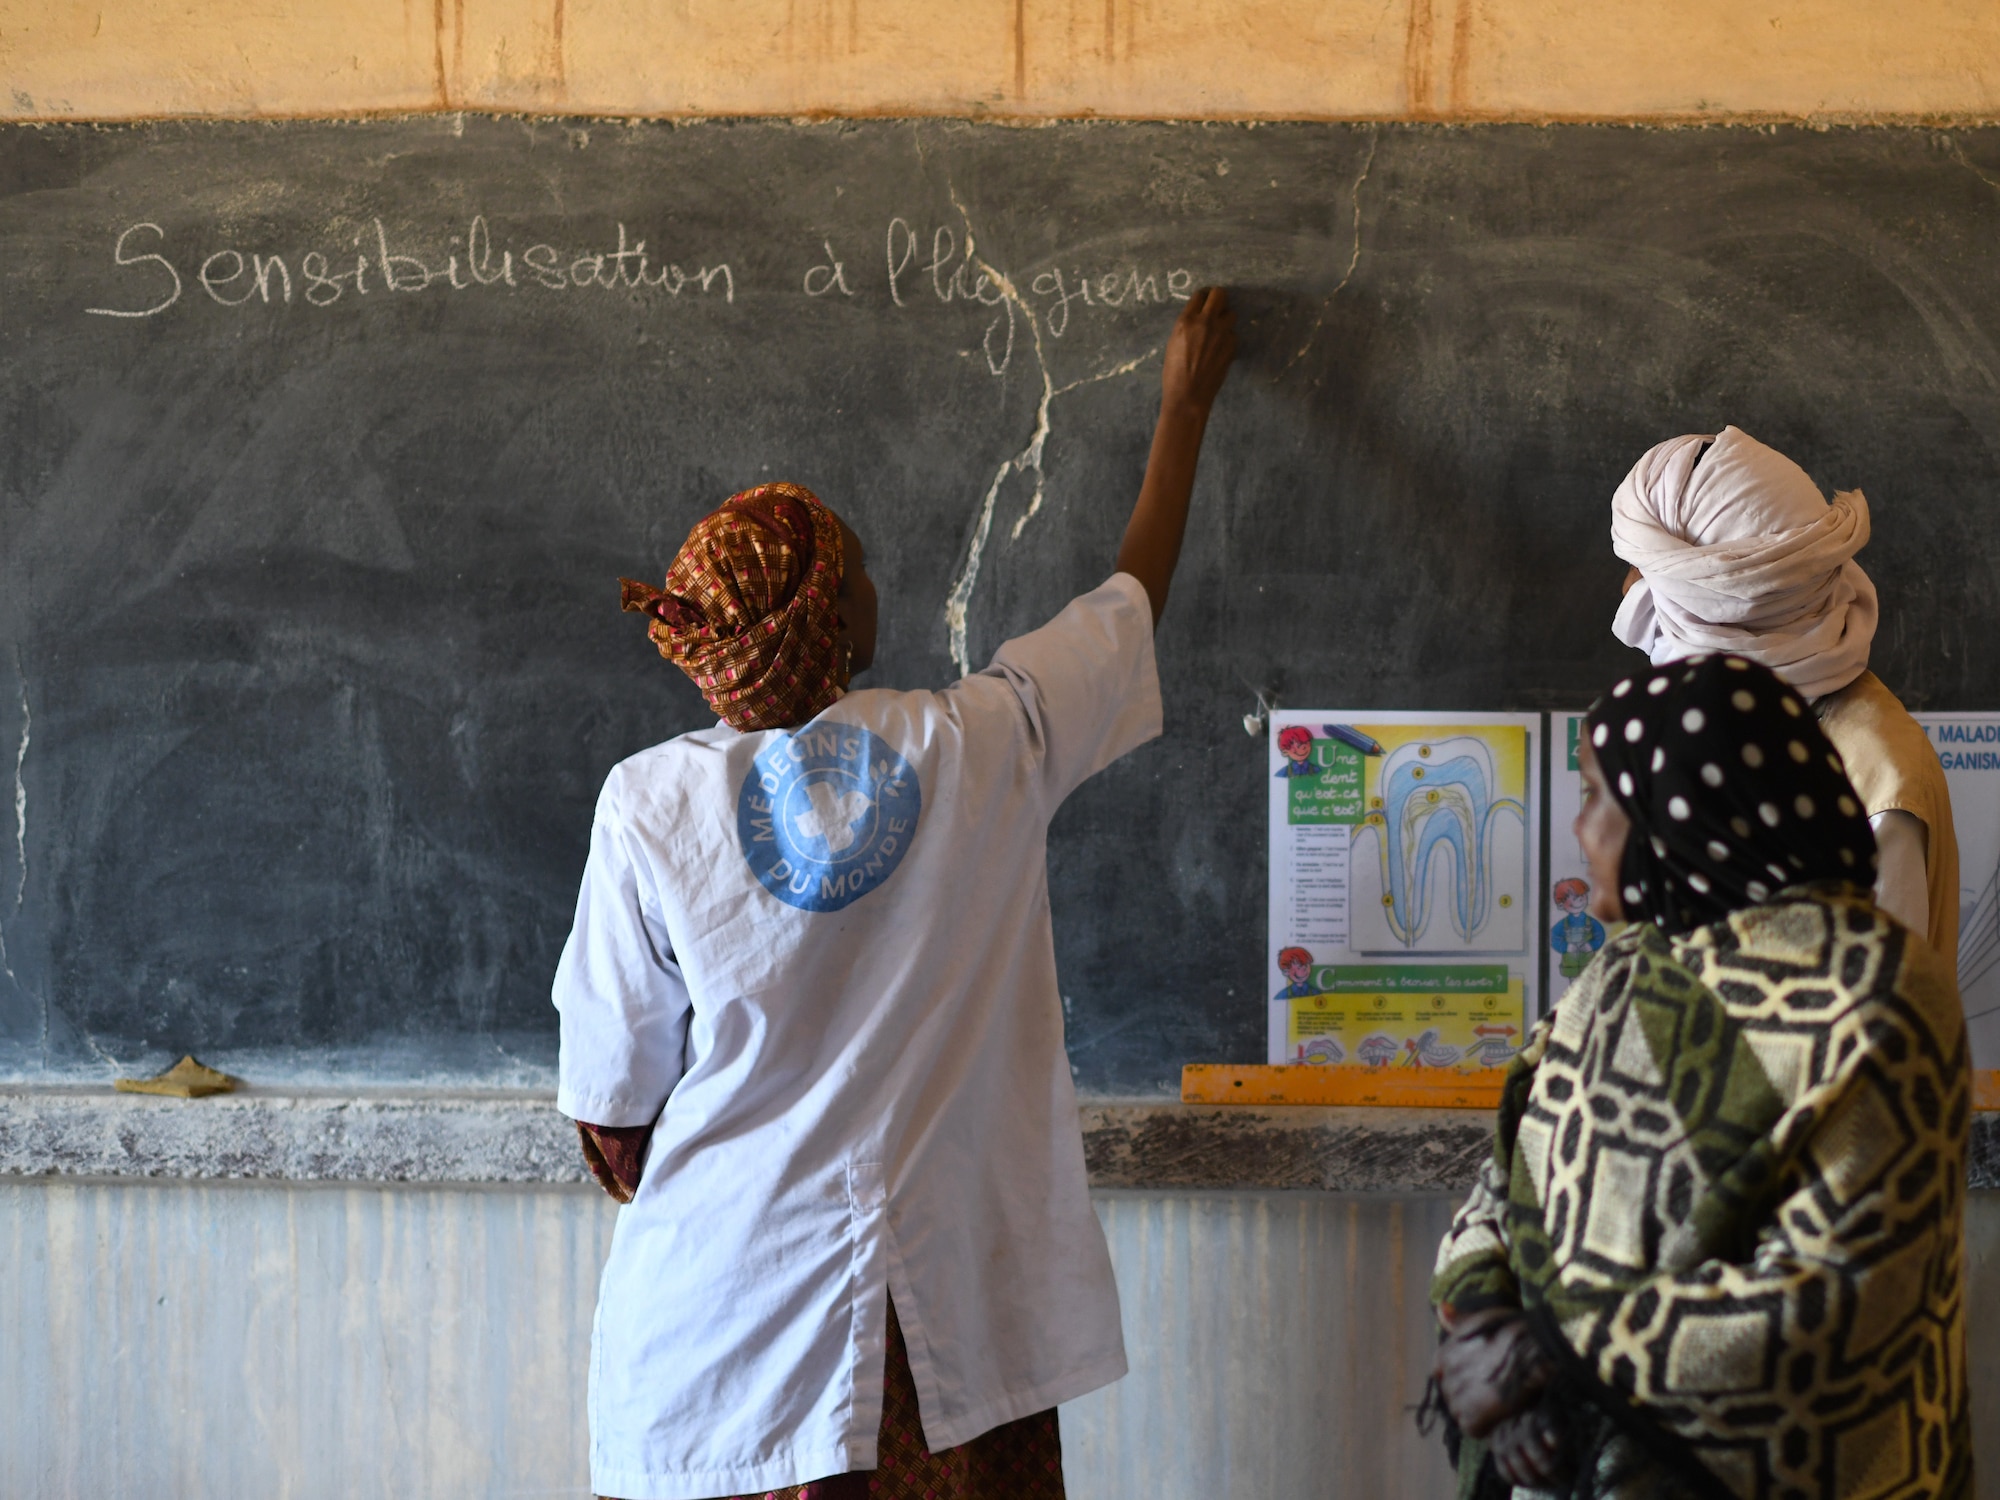 Dr. Mahaman Aicha, an Agadez city dentist, teaches a dental hygiene course to local school children in the village of Tsakatalam, Niger, Dec. 14, 2019. The U.S. Army 443rd Civil Affairs Battalion Civil Affairs Team 219 deployed to Nigerien Air Base 201 partnered with the dentist to teach the Tsakatalam Primary School students for the first time how to properly brush and floss their teeth and the importance of good oral health. (U.S. Air Force photo by Staff Sgt. Alex Fox Echols III)